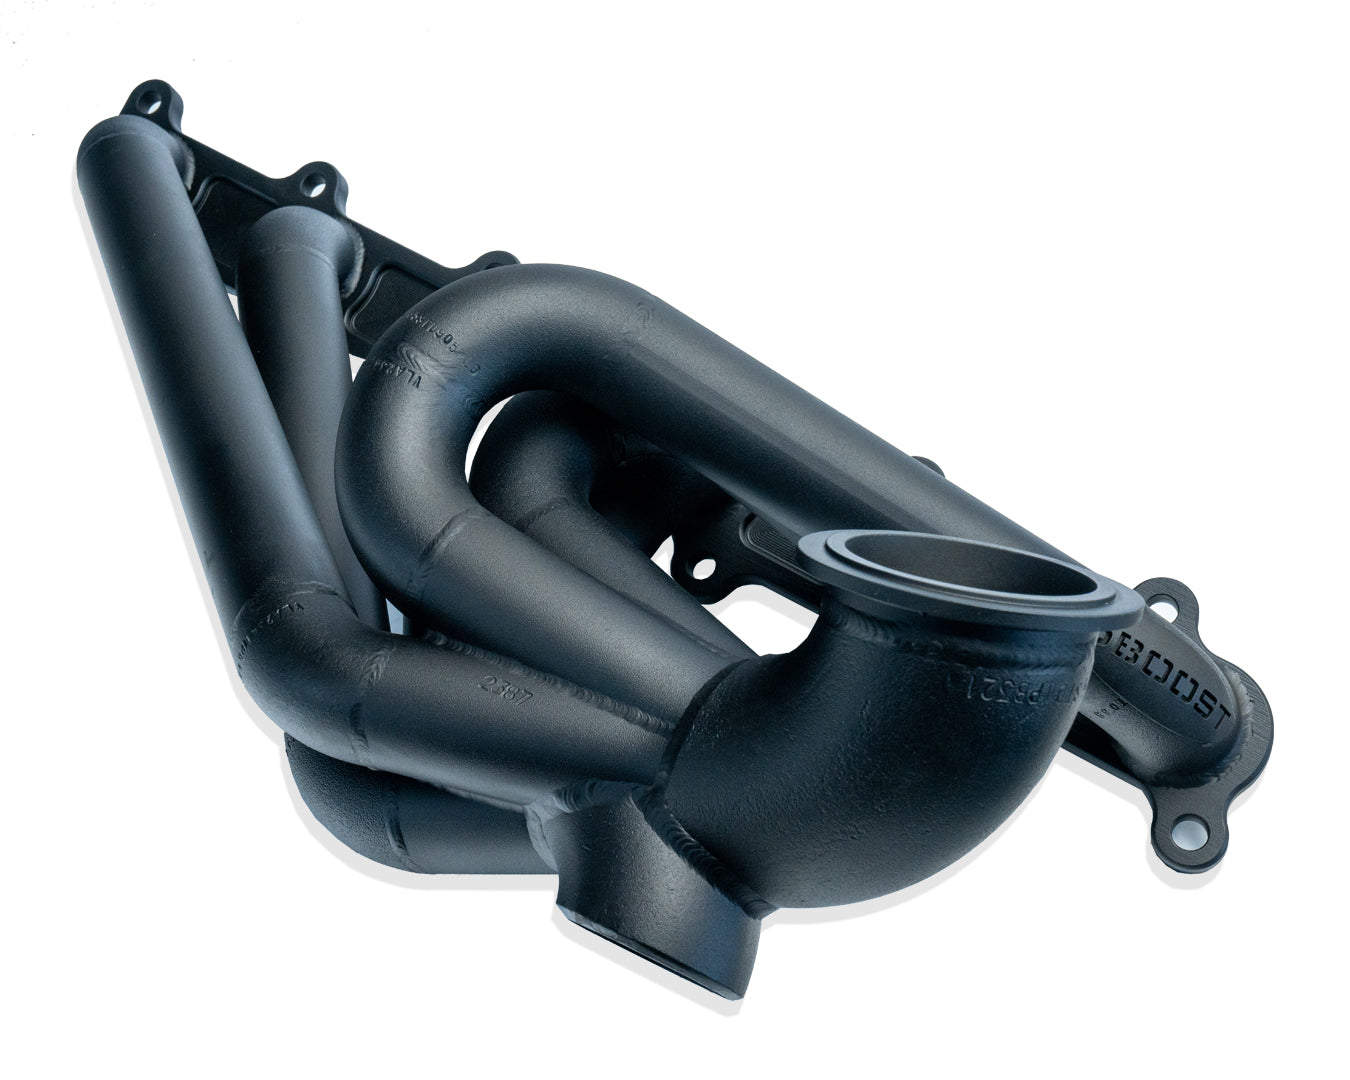 Ford X Series (SOHC) Forward Position Promod Exhaust Manifold